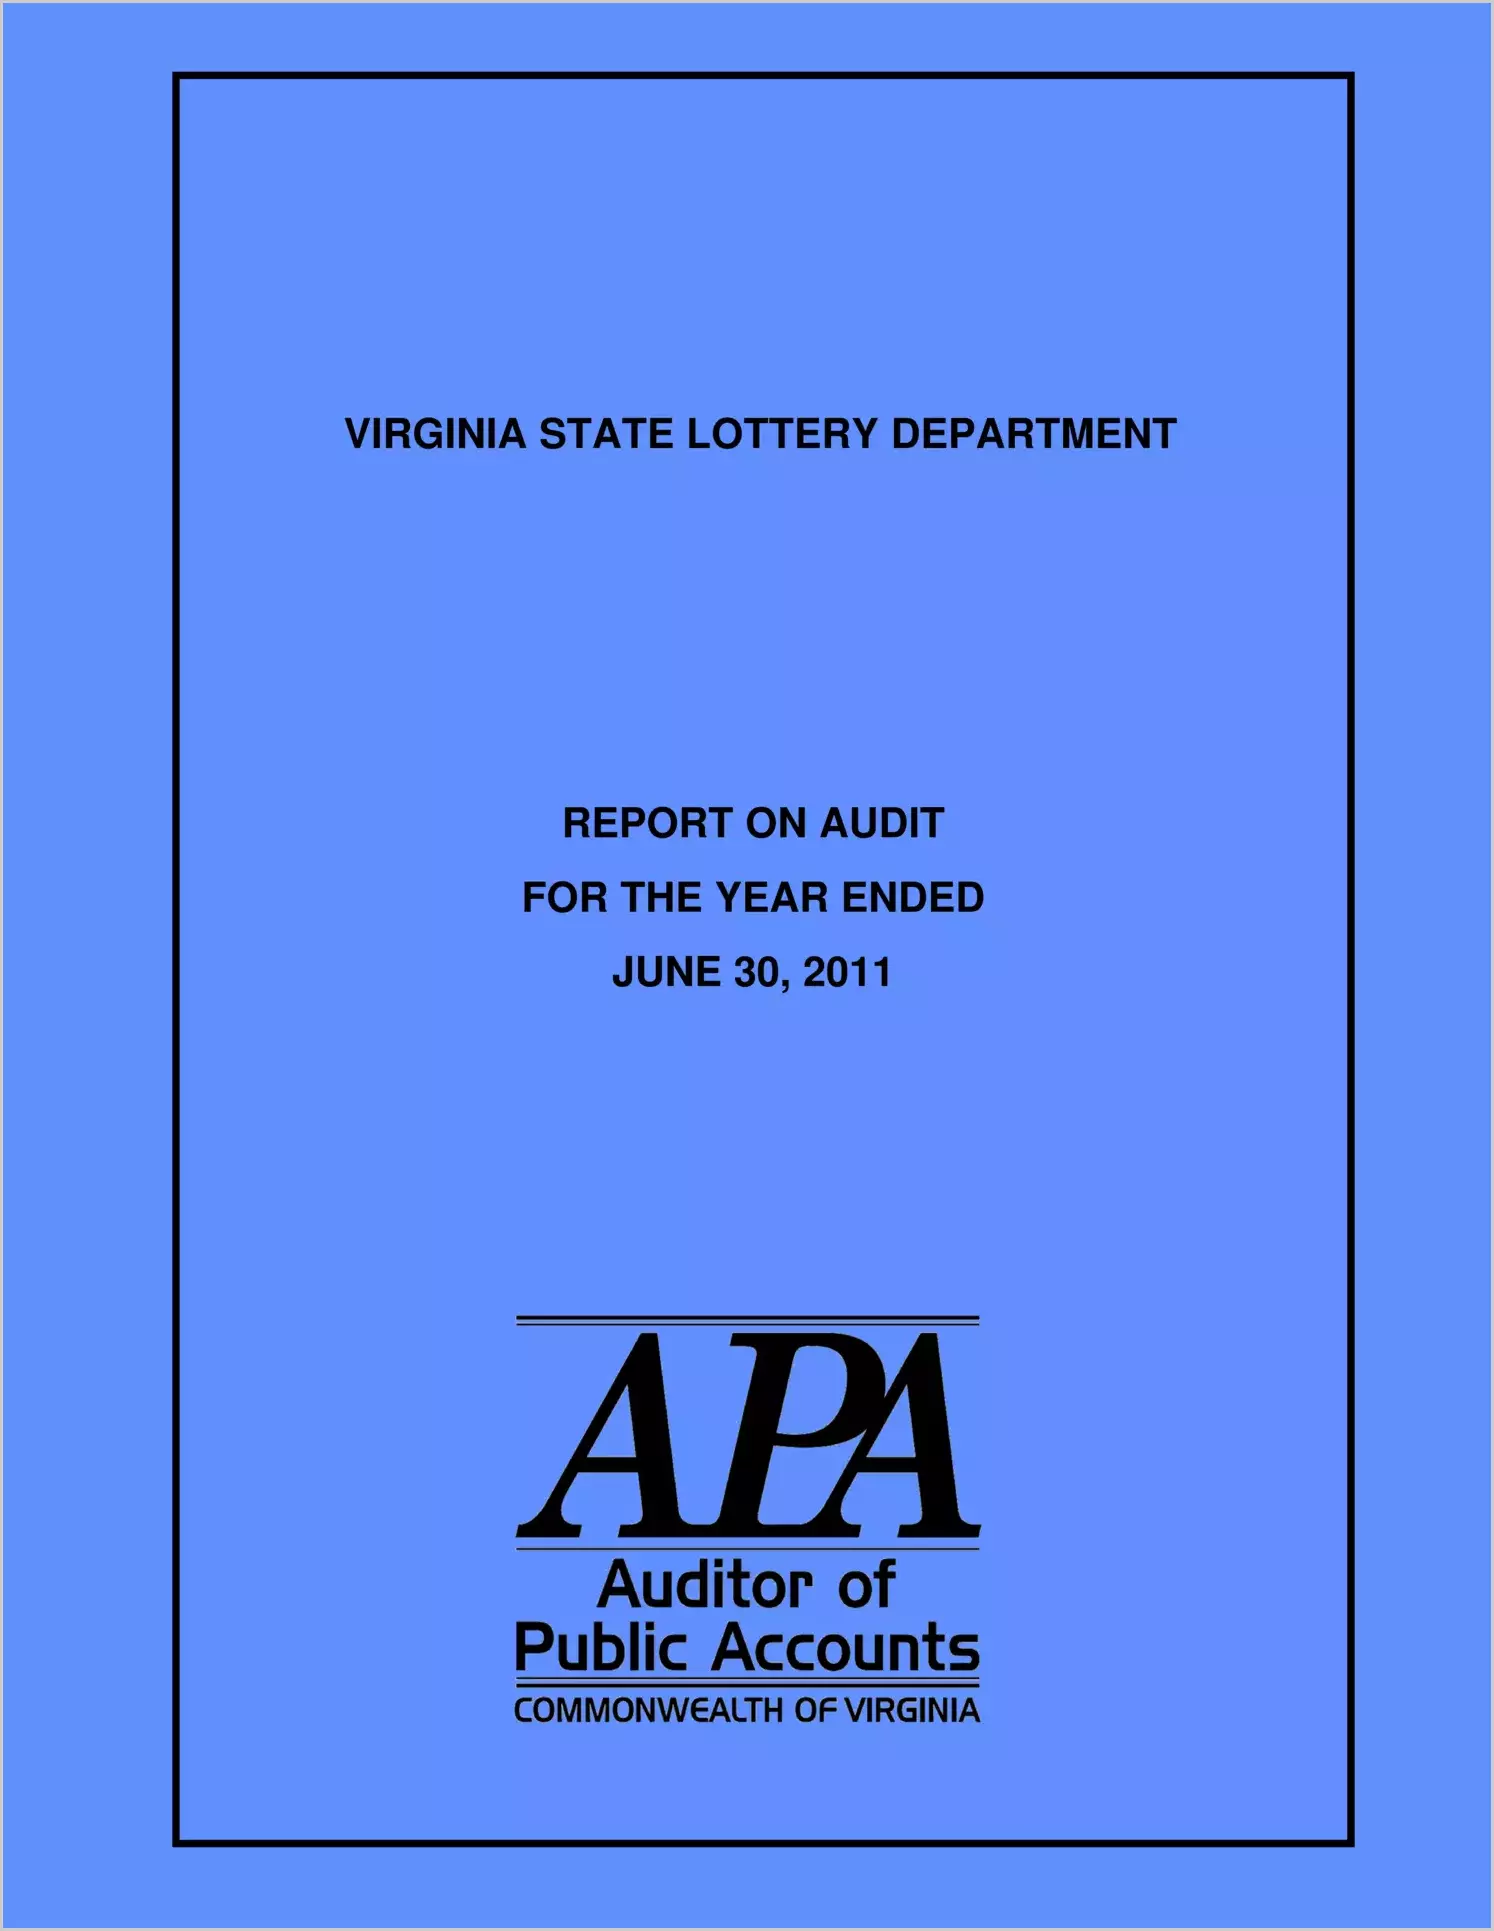 State Lottery Department for the year ended June 30, 2011